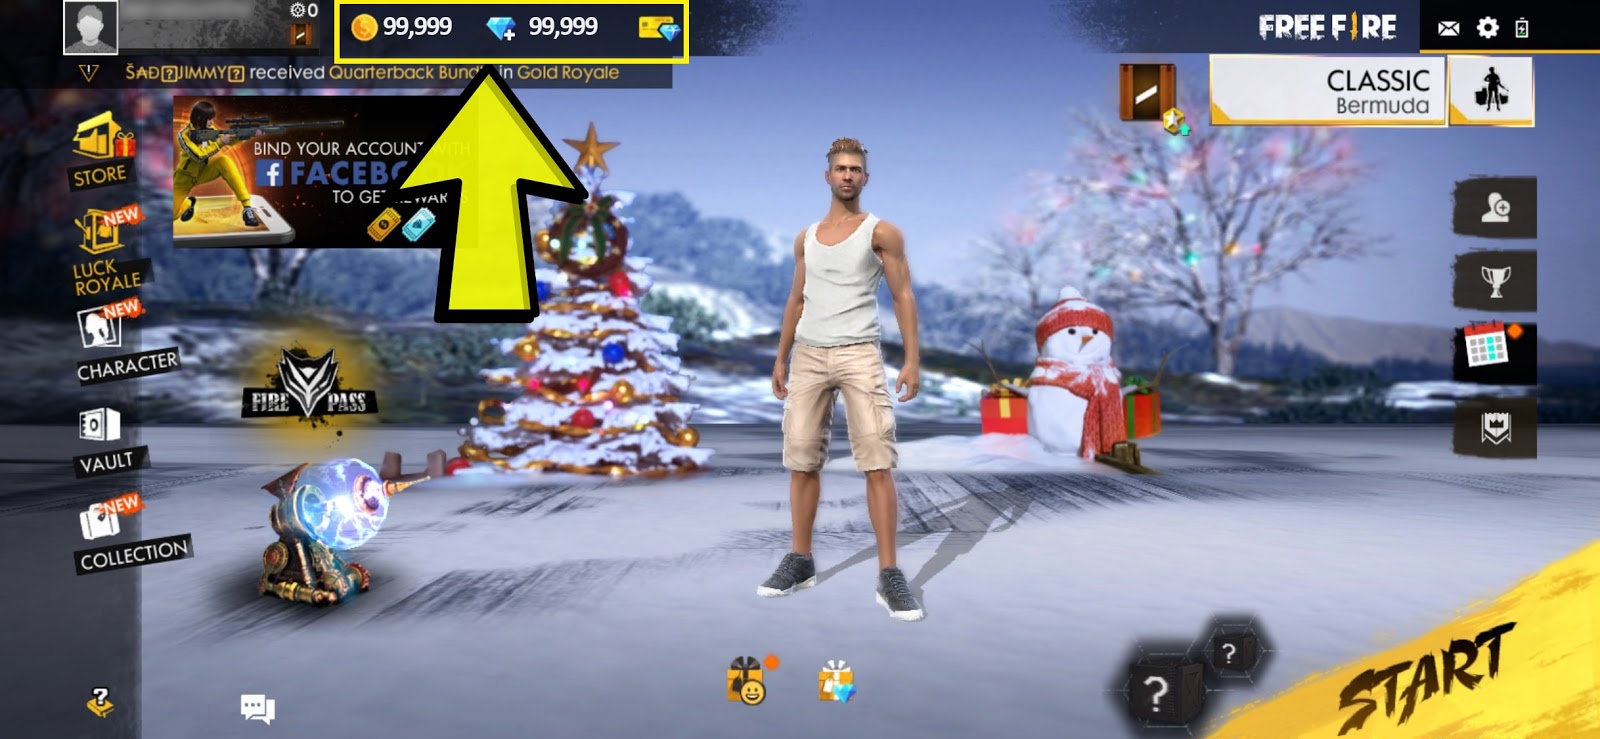 Free Fire Hack Kaise Kare Video New